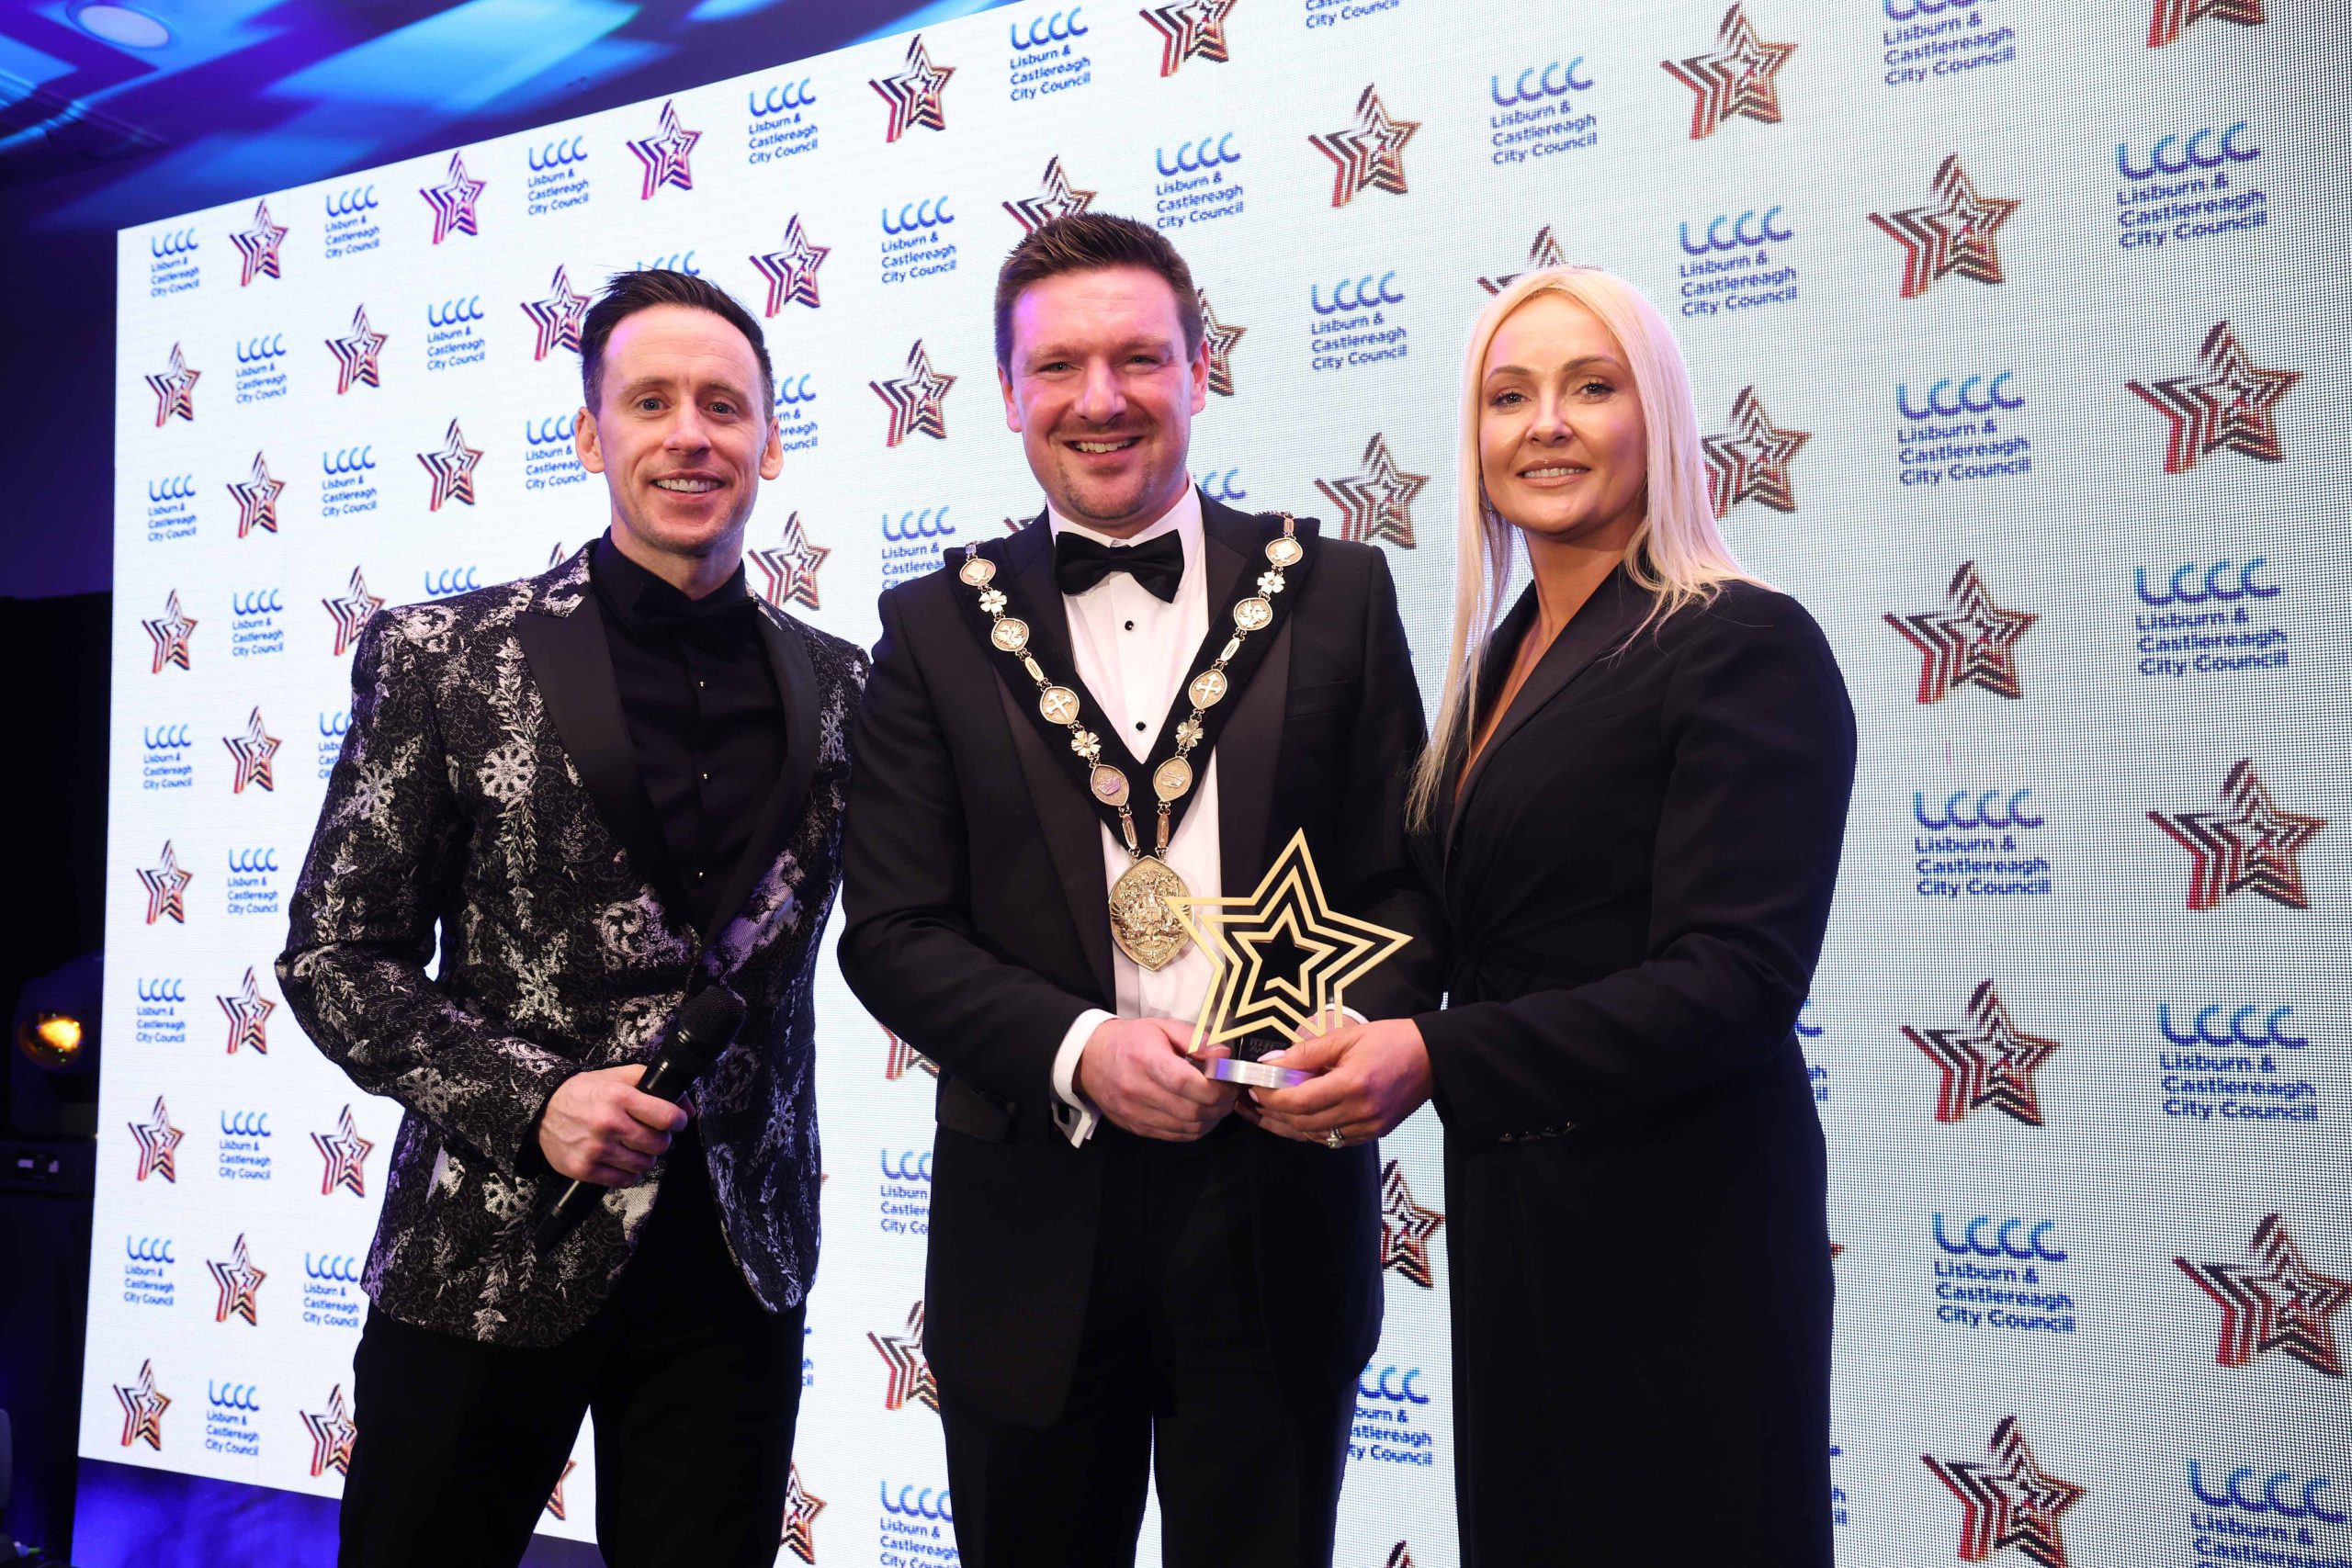 Down Royal Races Ahead with Best Tourism Business Award